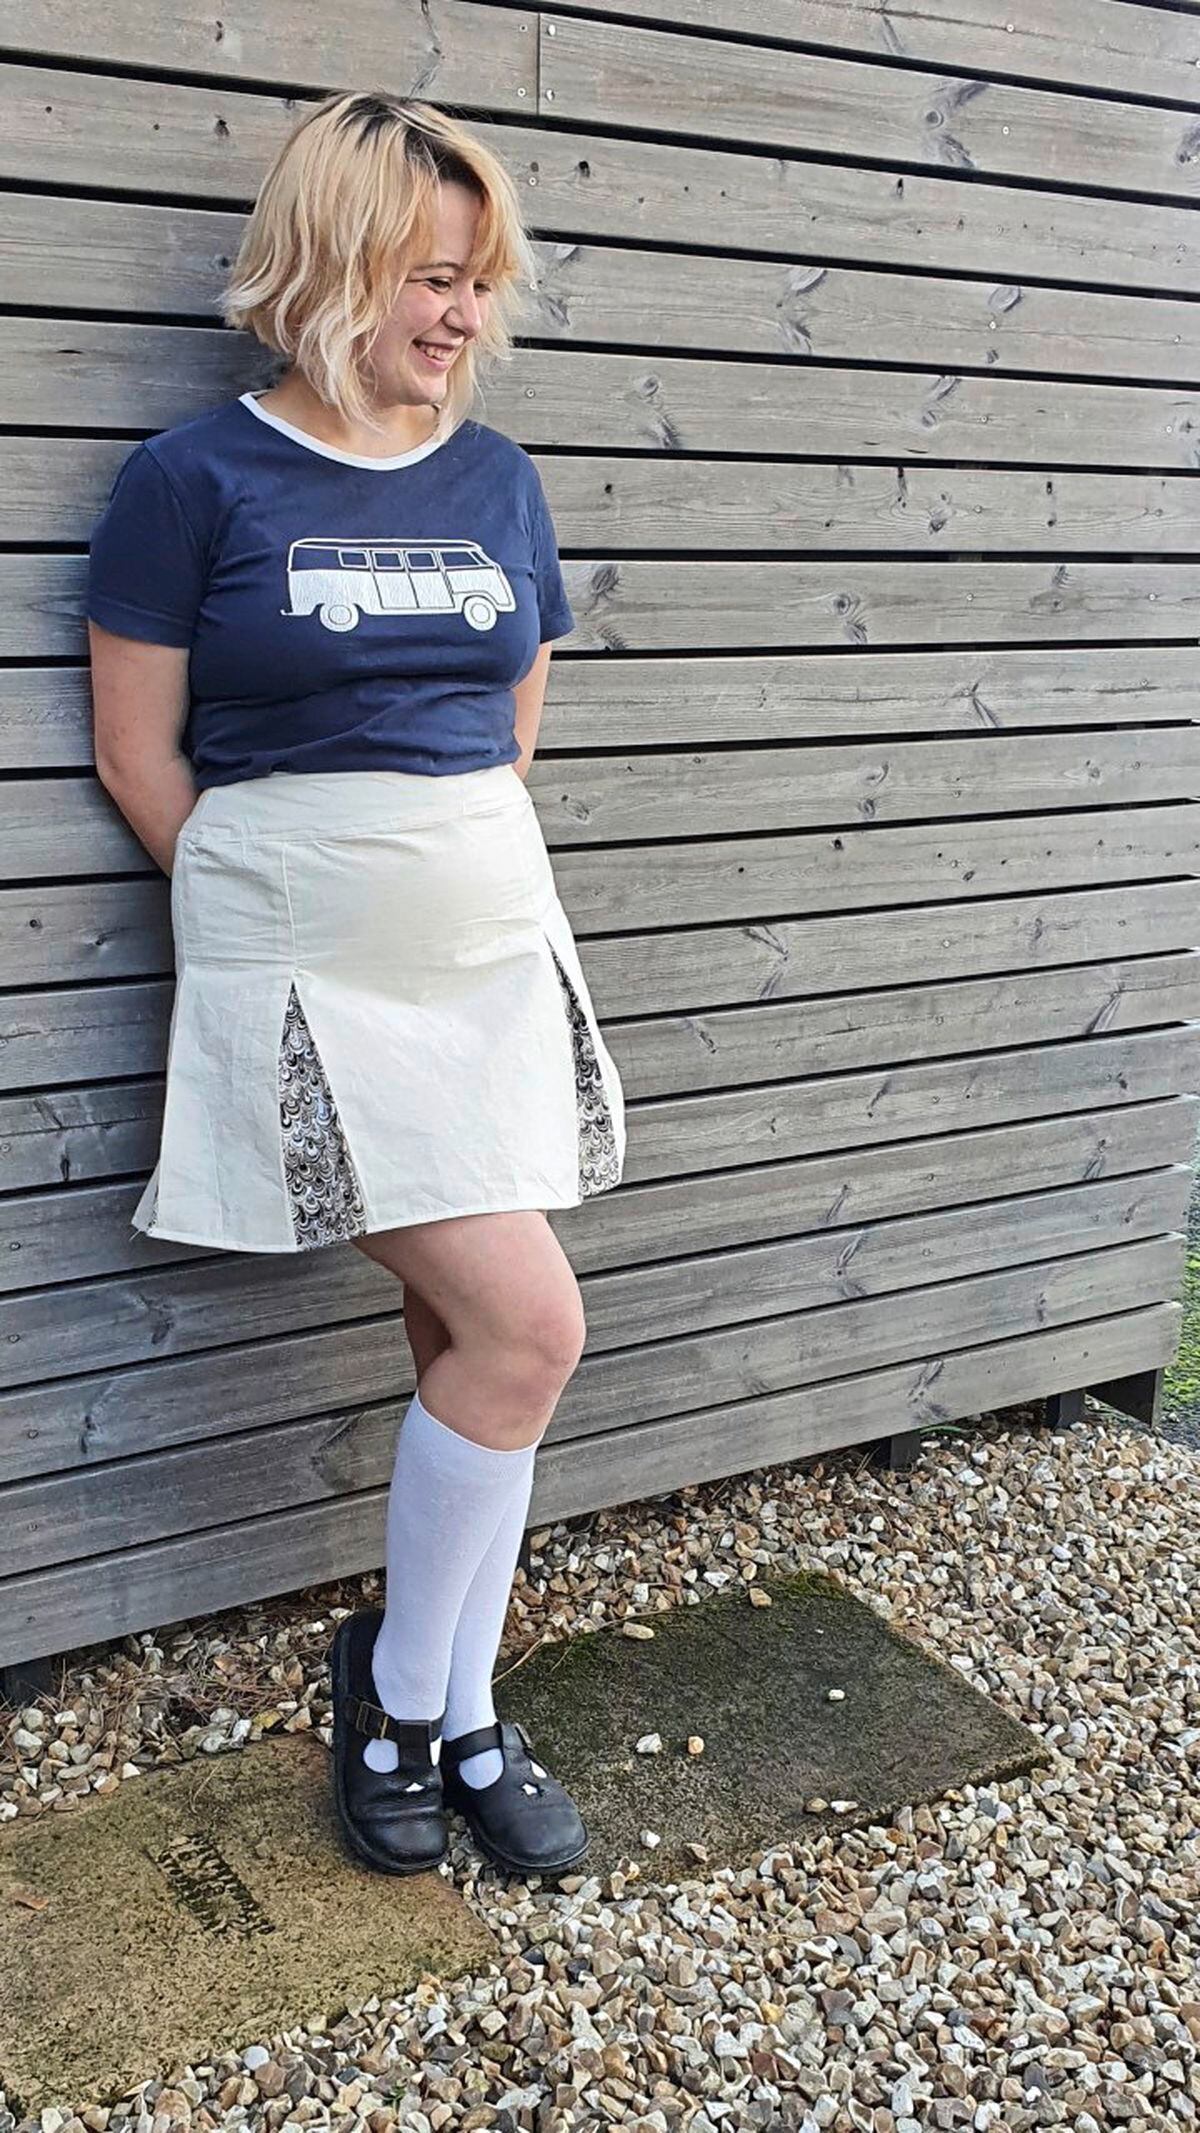 Maisie Bisson wearing a skirt that she designed. (29316887)